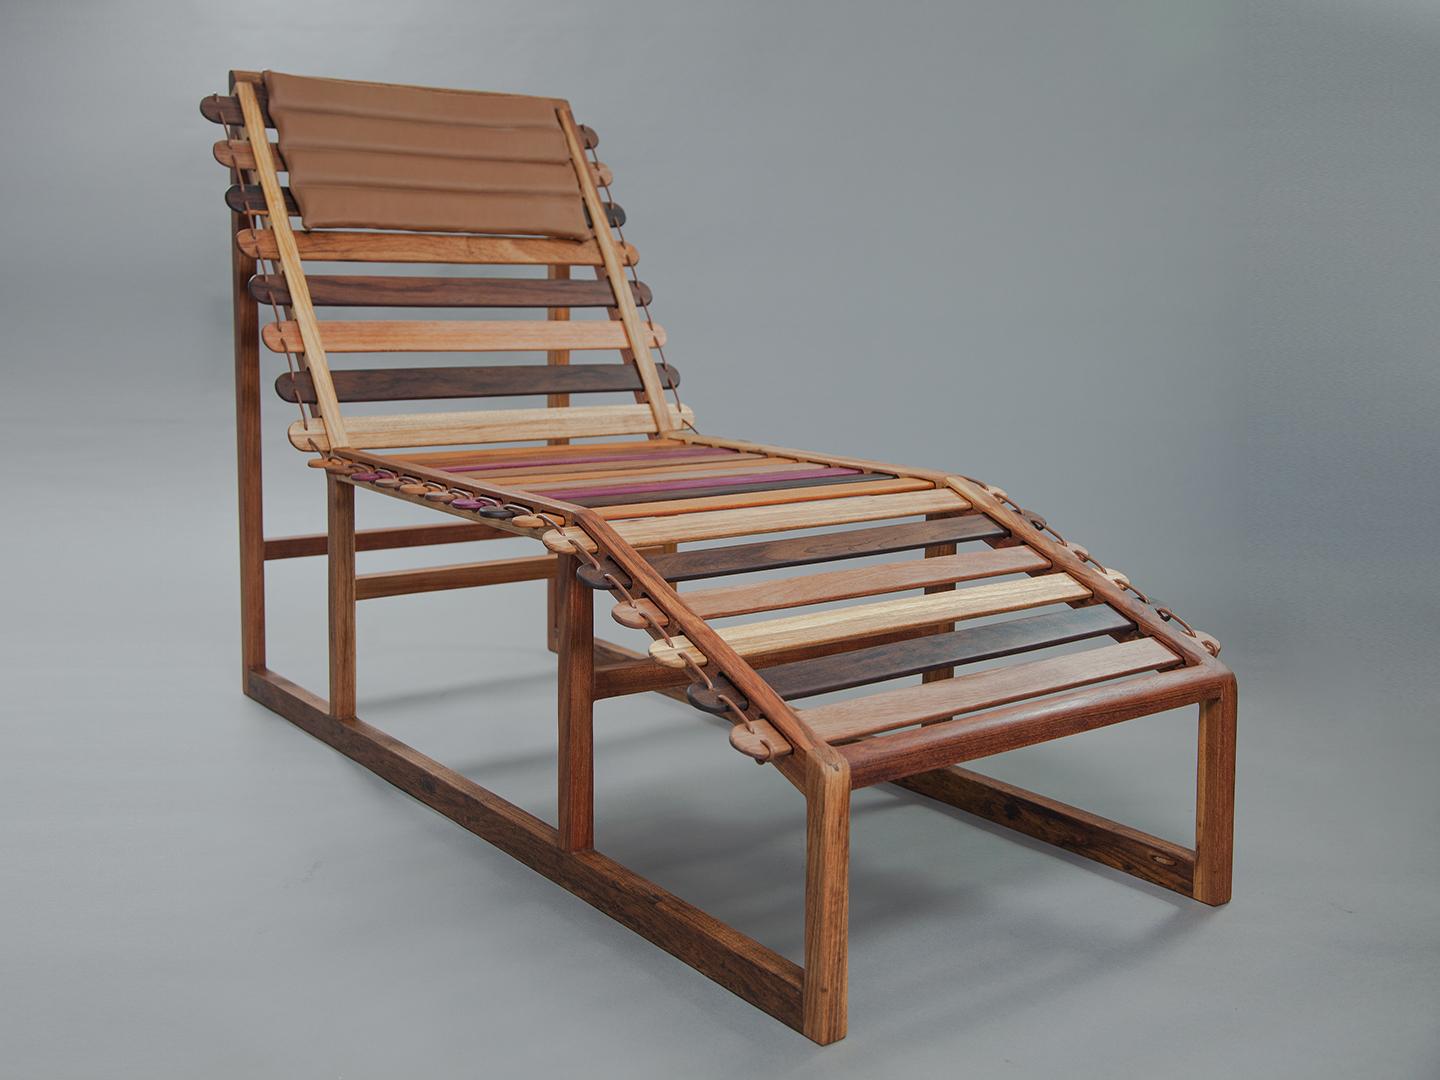 The Vino chaise longue, made entirely from leftover noble woods from other projects, features smooth, straight lines and explores the flexibility of wood. The horizontal slats that form the seat and backrest are loose, allowing you to mix and match